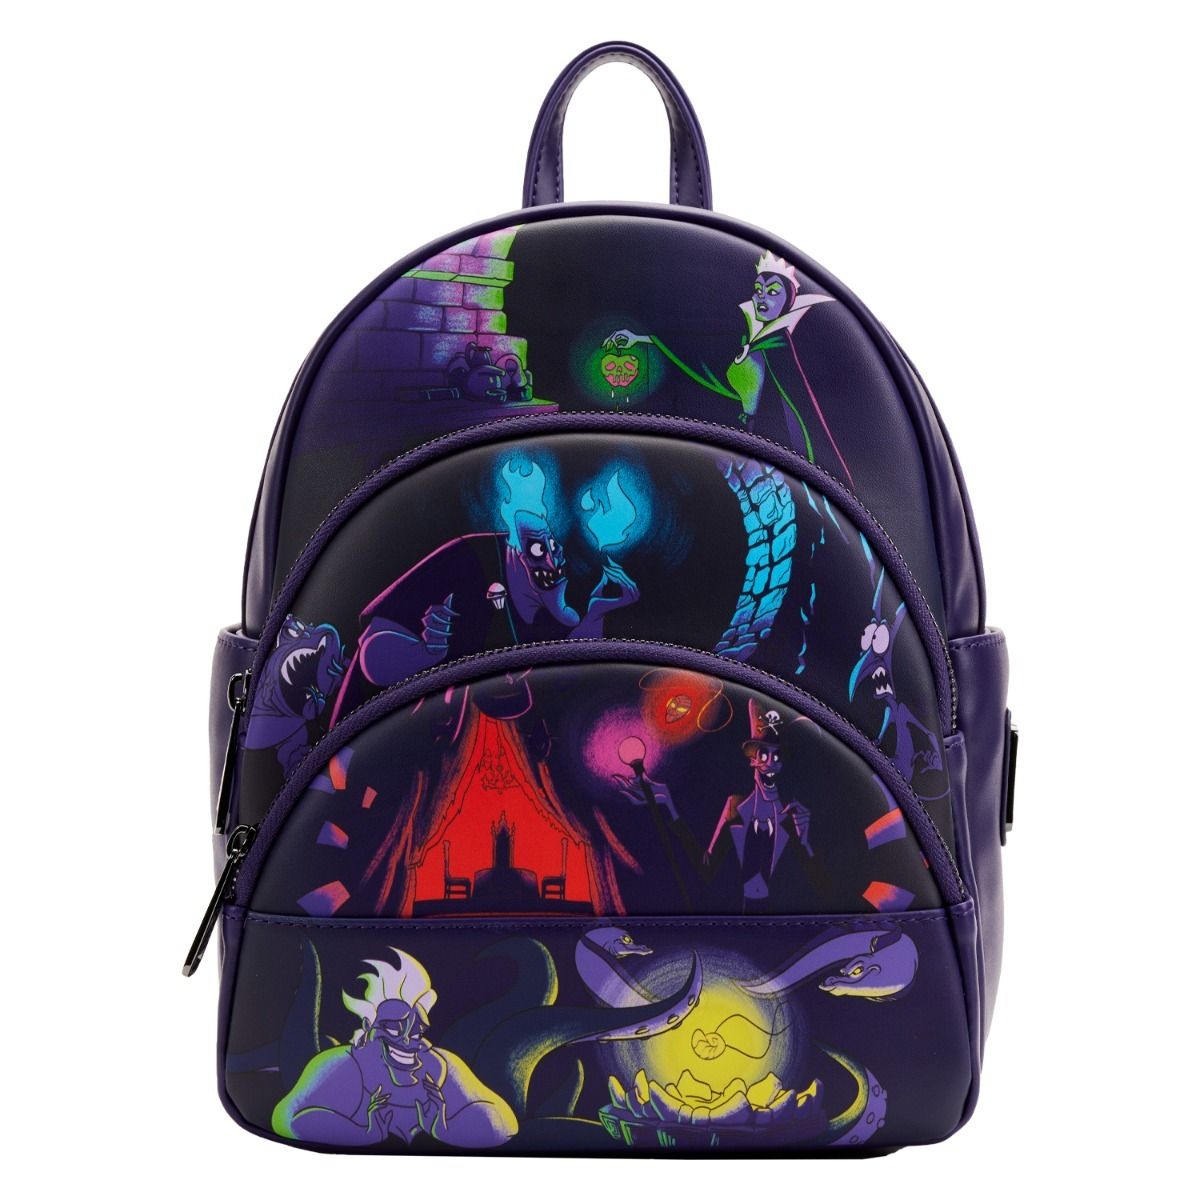 Buy Your Disney Princess Loungefly Backpack (Free Shipping) - Merchoid